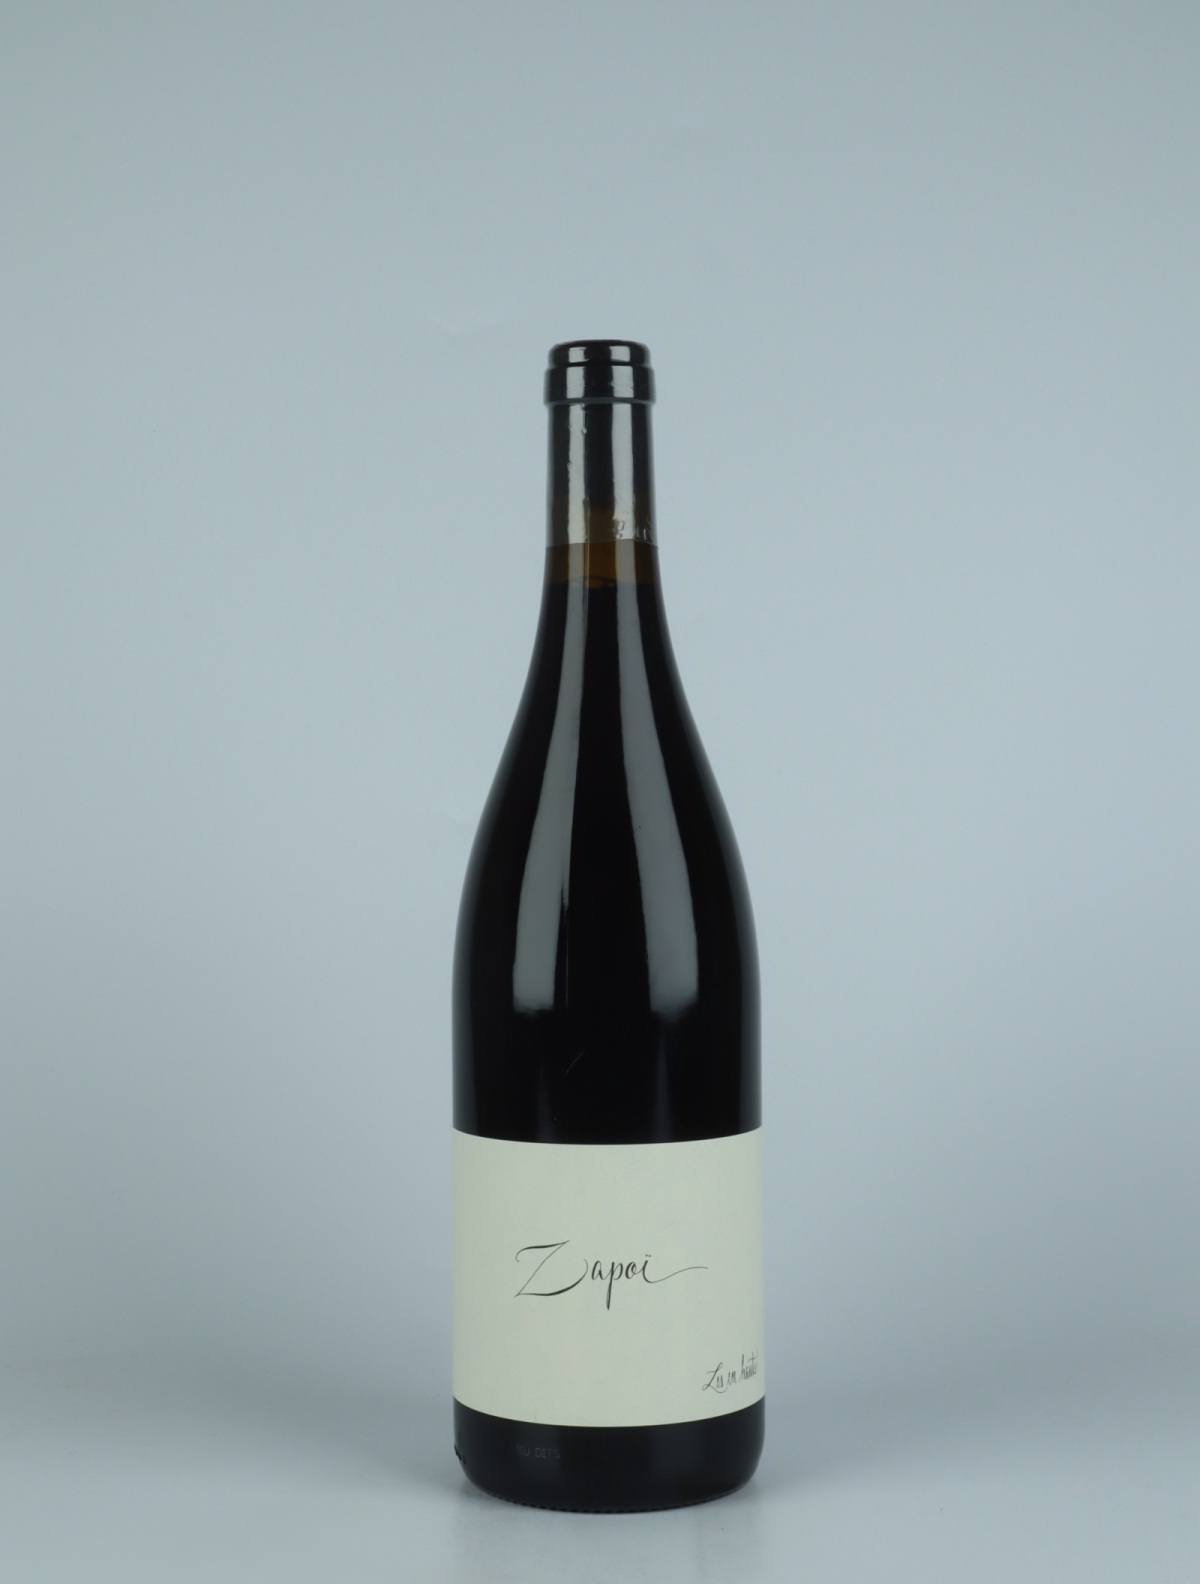 A bottle 2021 Zapoï Red wine from Les En Hauts, Beaujolais in France